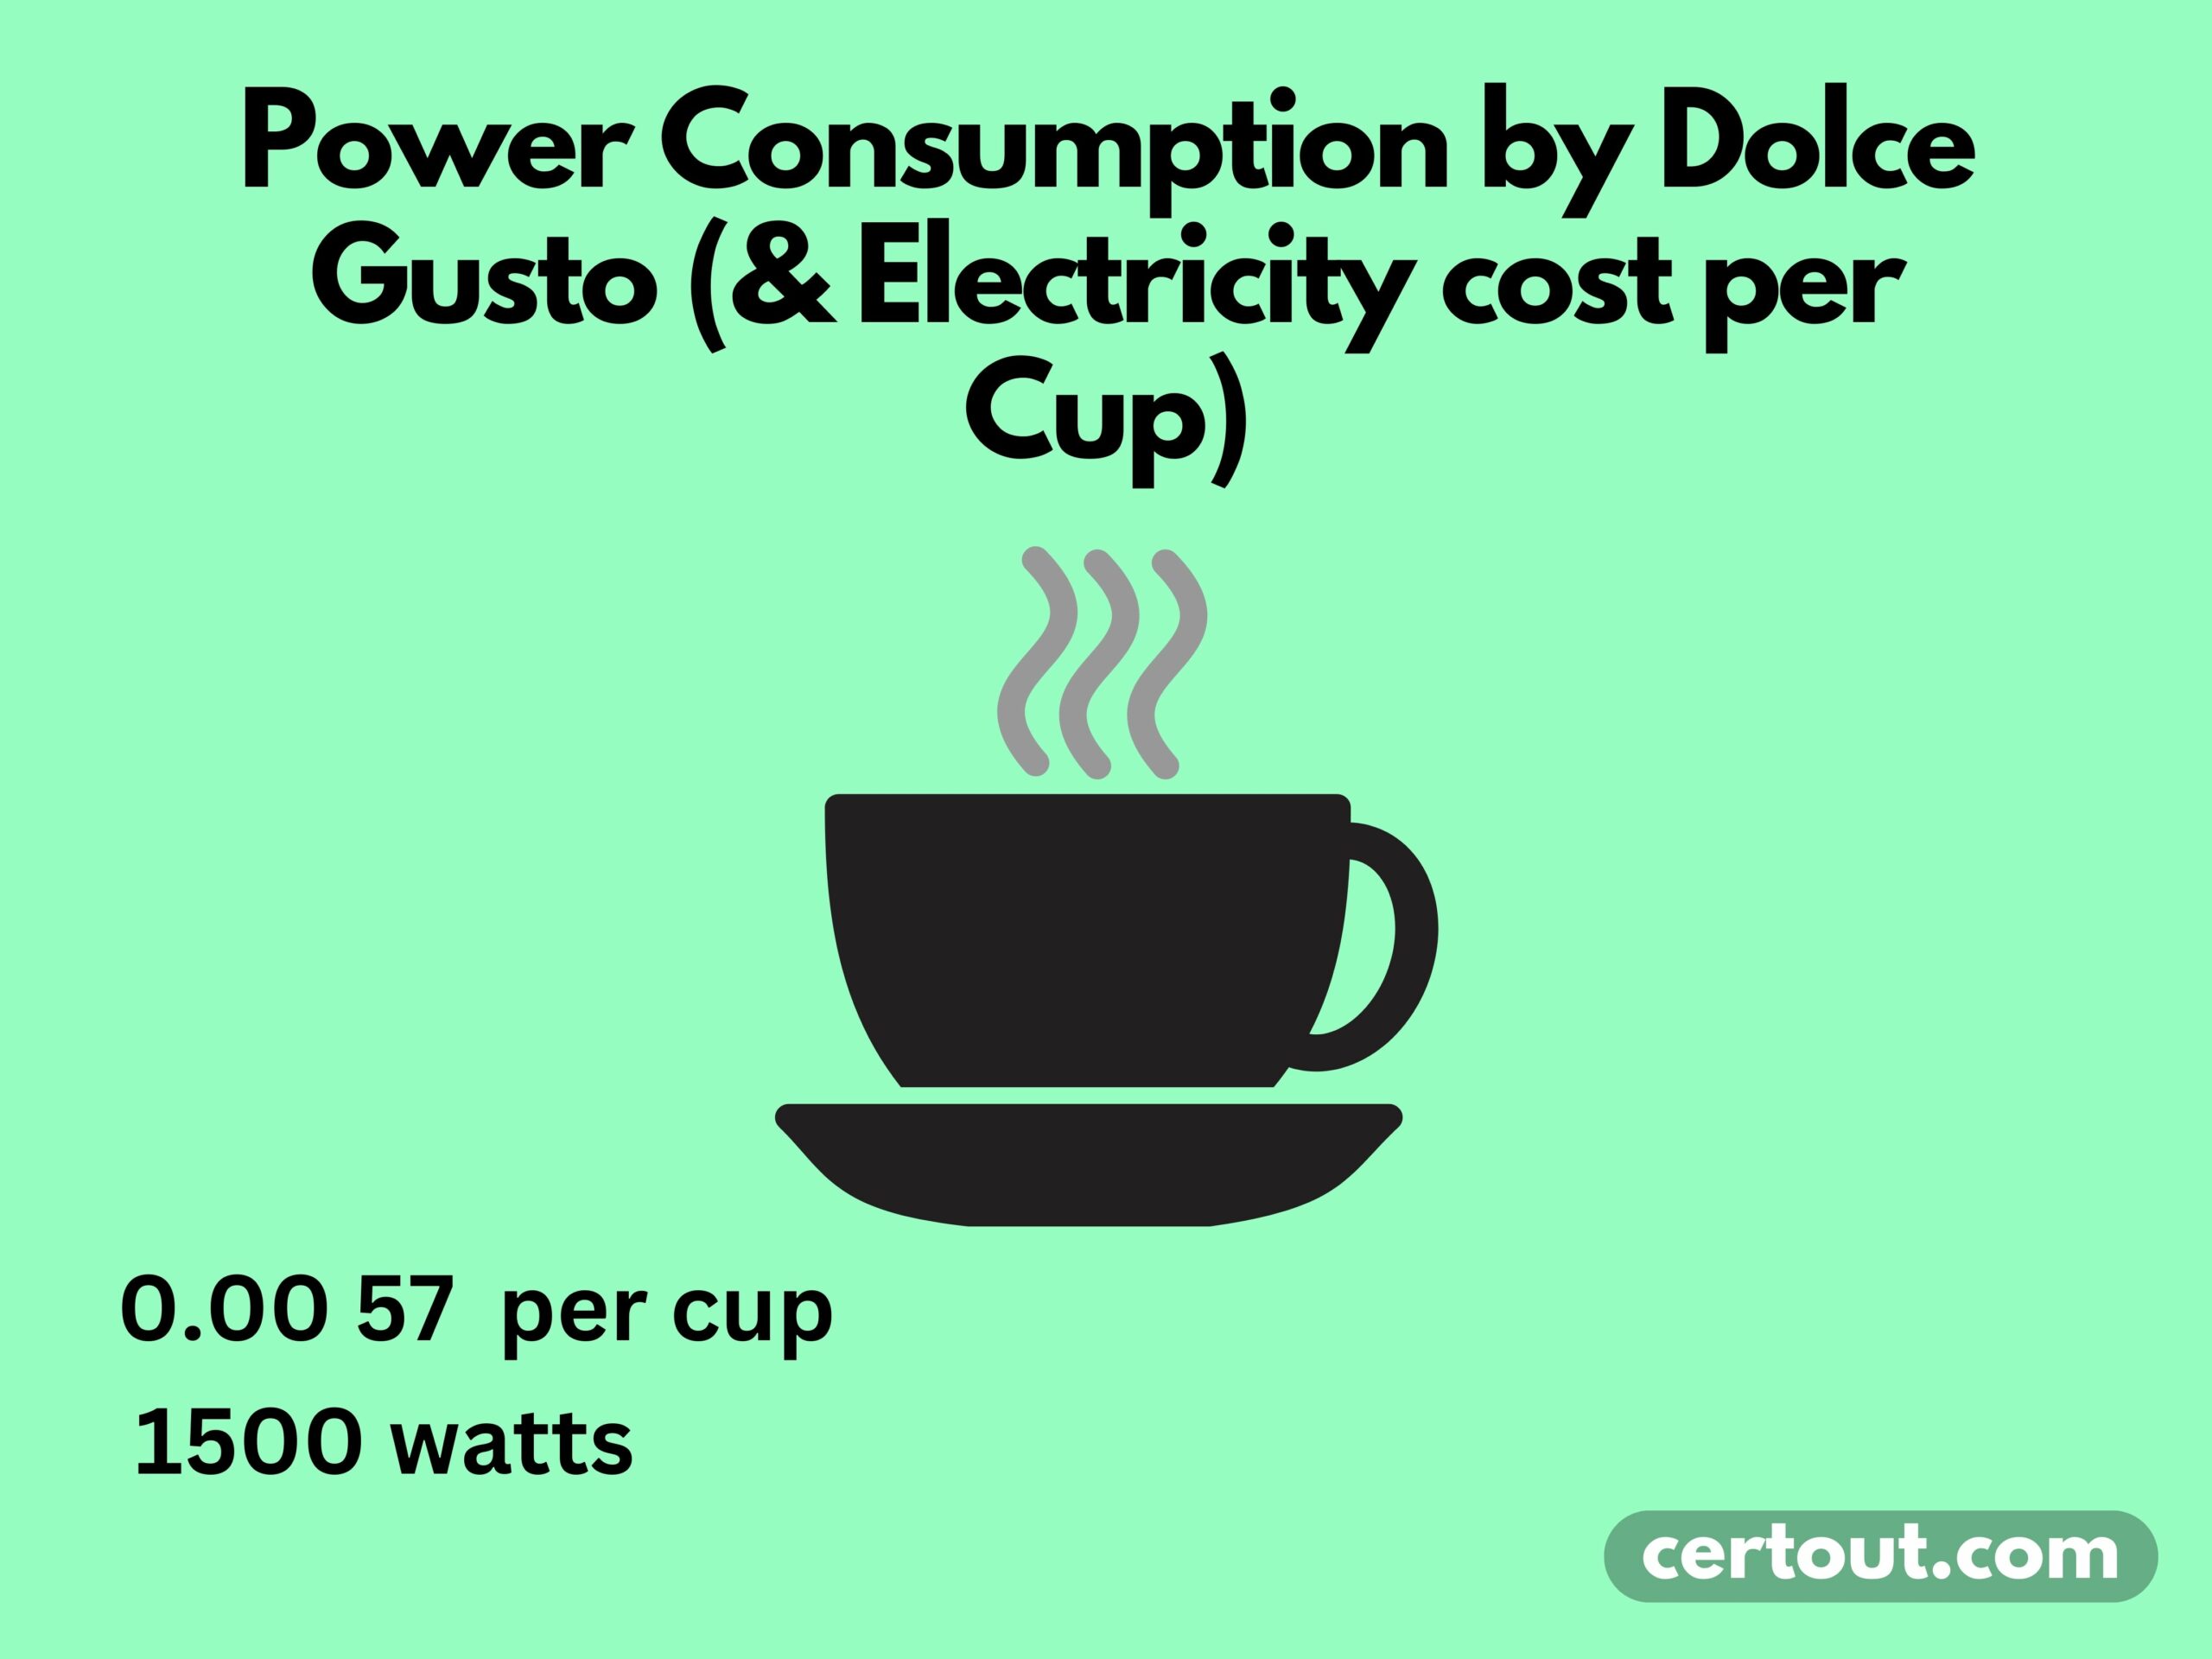 Power consumption by dolce gusto